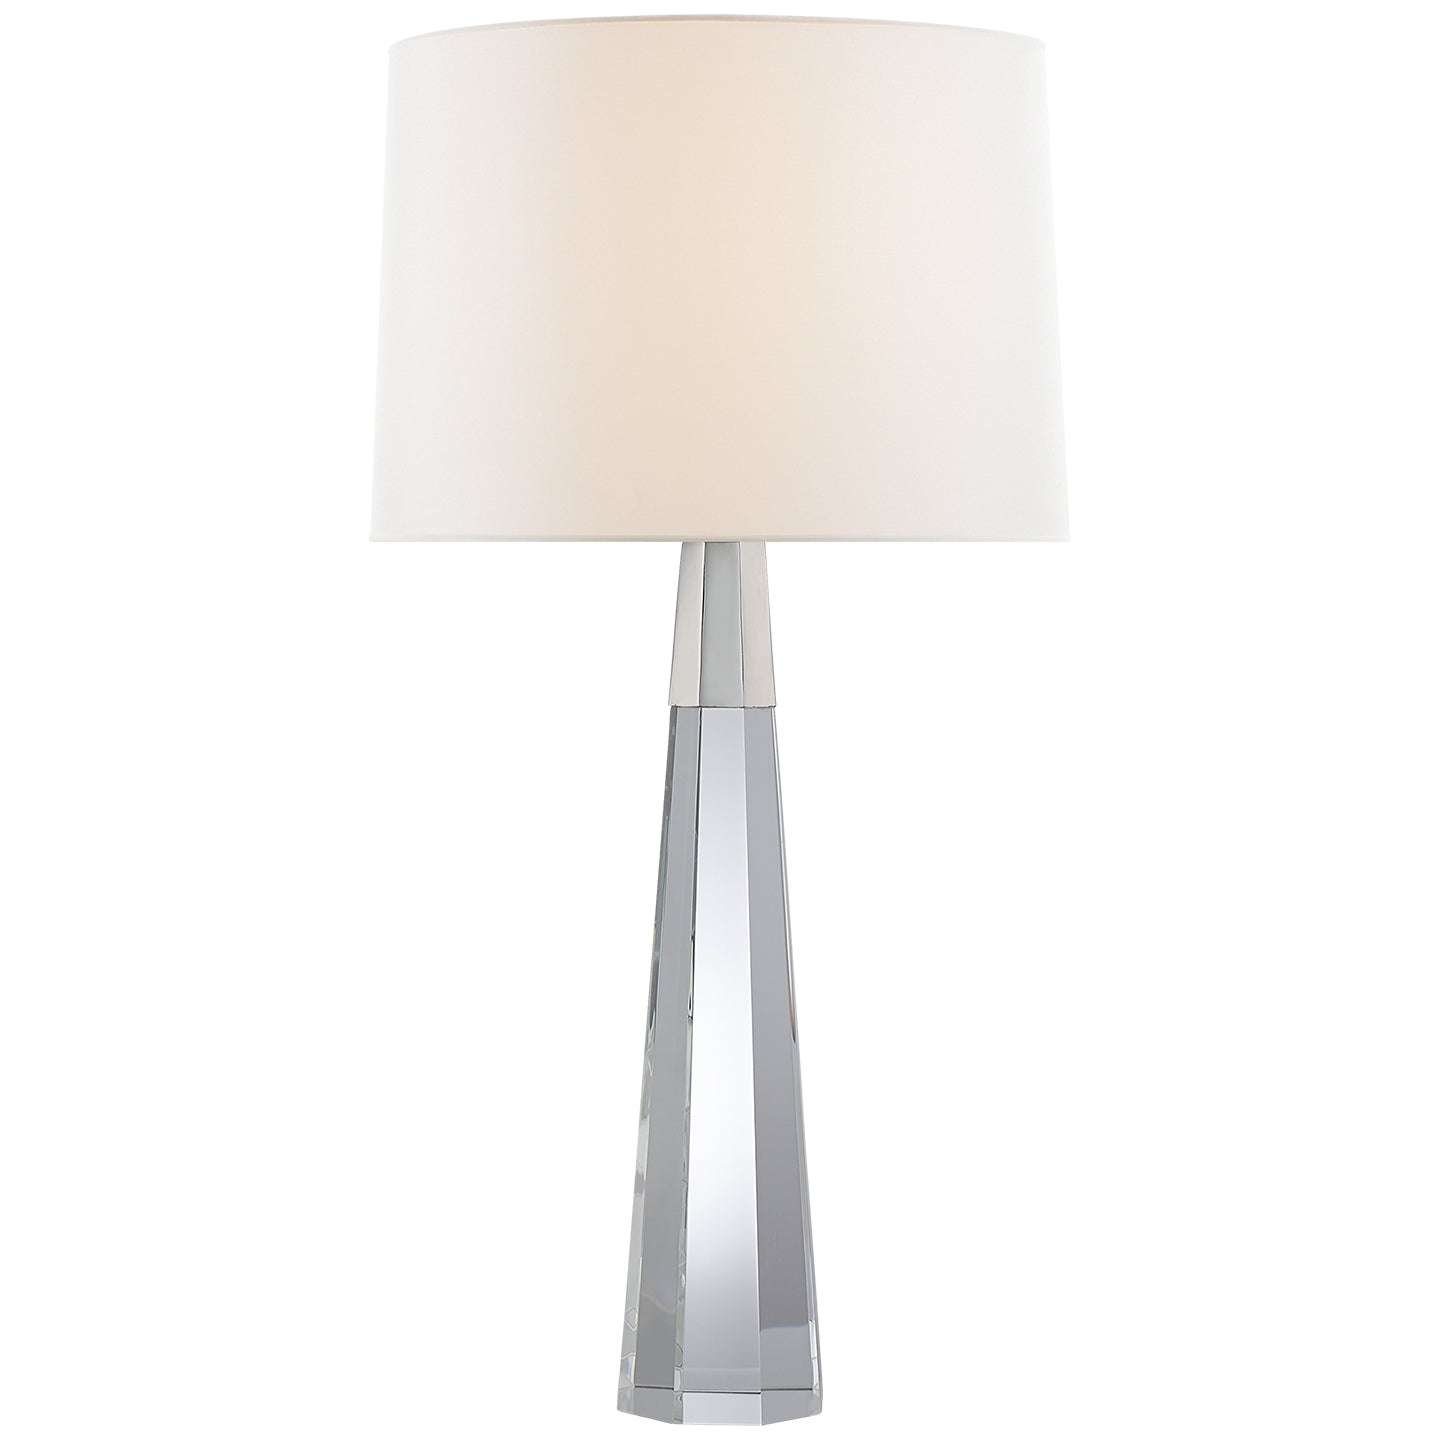 Load image into Gallery viewer, Visual Comfort Signature - ARN 3026CG/PN-L - Two Light Table Lamp - Olsen - Crystal with Polished Nickel
